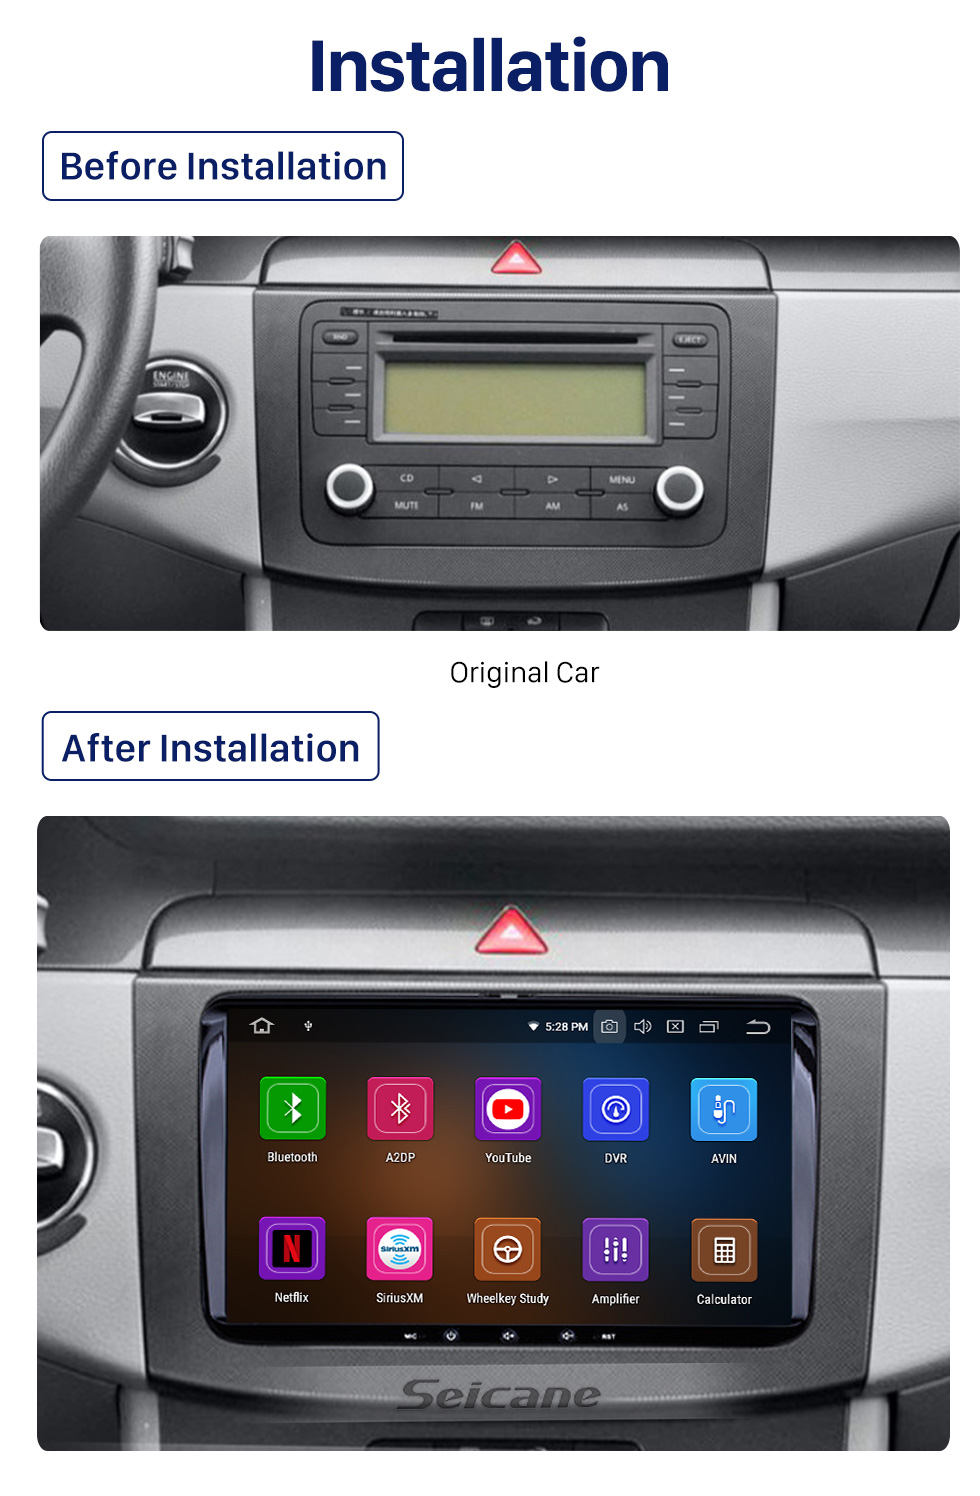 Seicane Android 10.0 VW Volkswagen Universal SKODA Seat GPS DVD Player In Dash Radio System with HD touch Screen Bluetooth Mirror Link OBD2 DVR Backup Camera